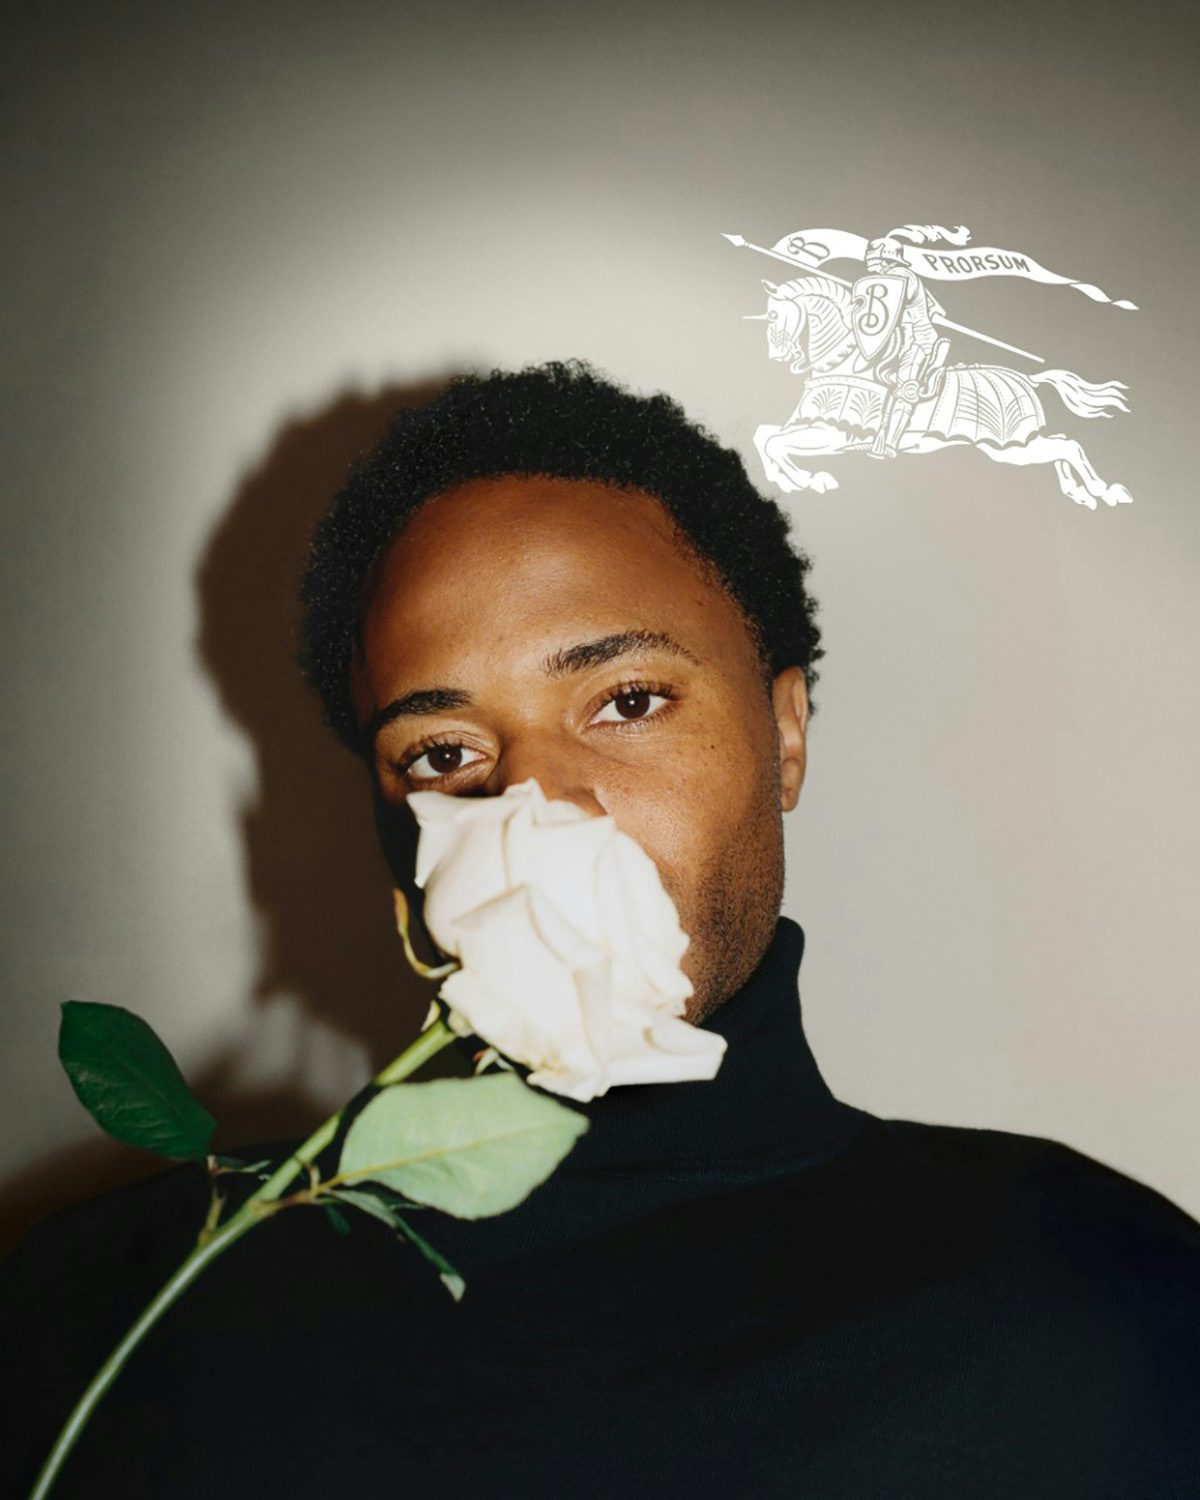 Portrait photo of Raheem Sterling wearing a dark roll neck top holding a white rose to his face. On top of his photo is the new Burberry logo in white, showing a knight riding a horse and carrying a flag that reads 'Prorsum'